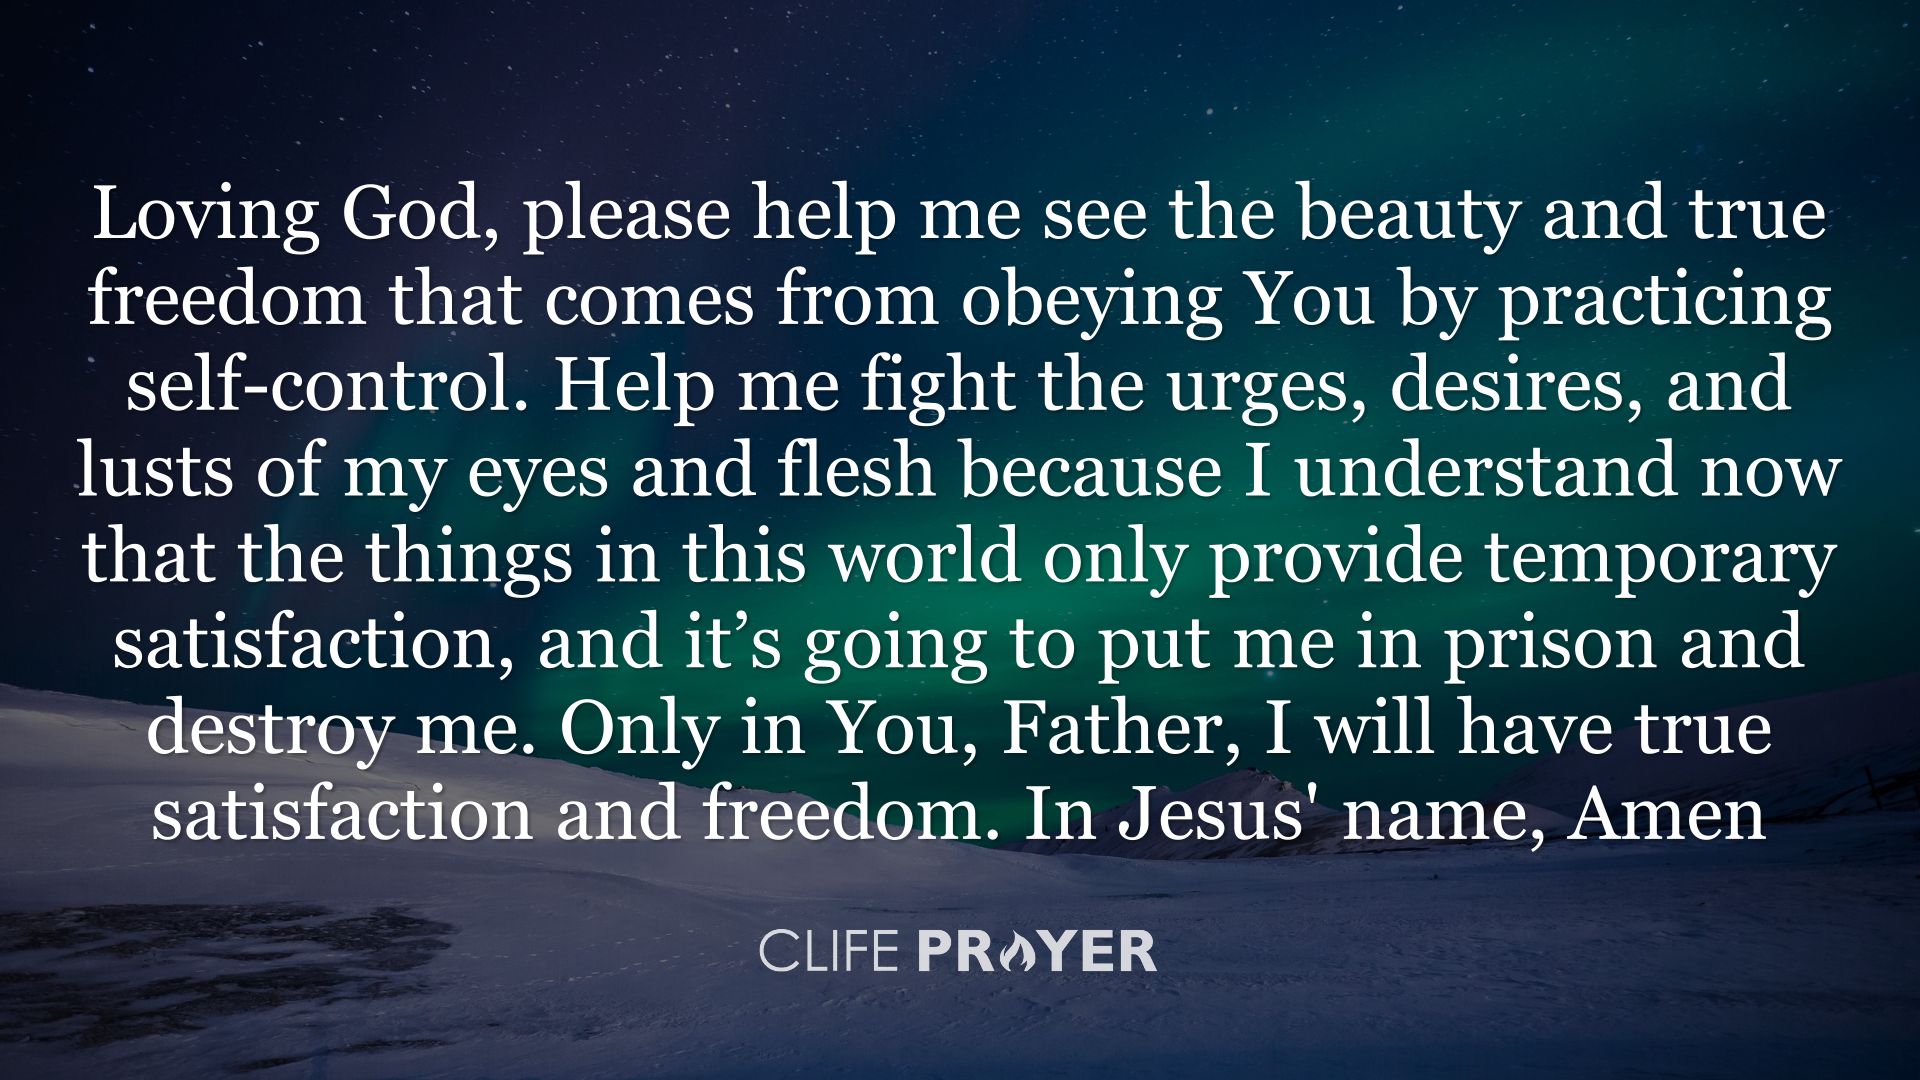 5 Prayers Aid Recovery for Those Who Are Suffering Addiction